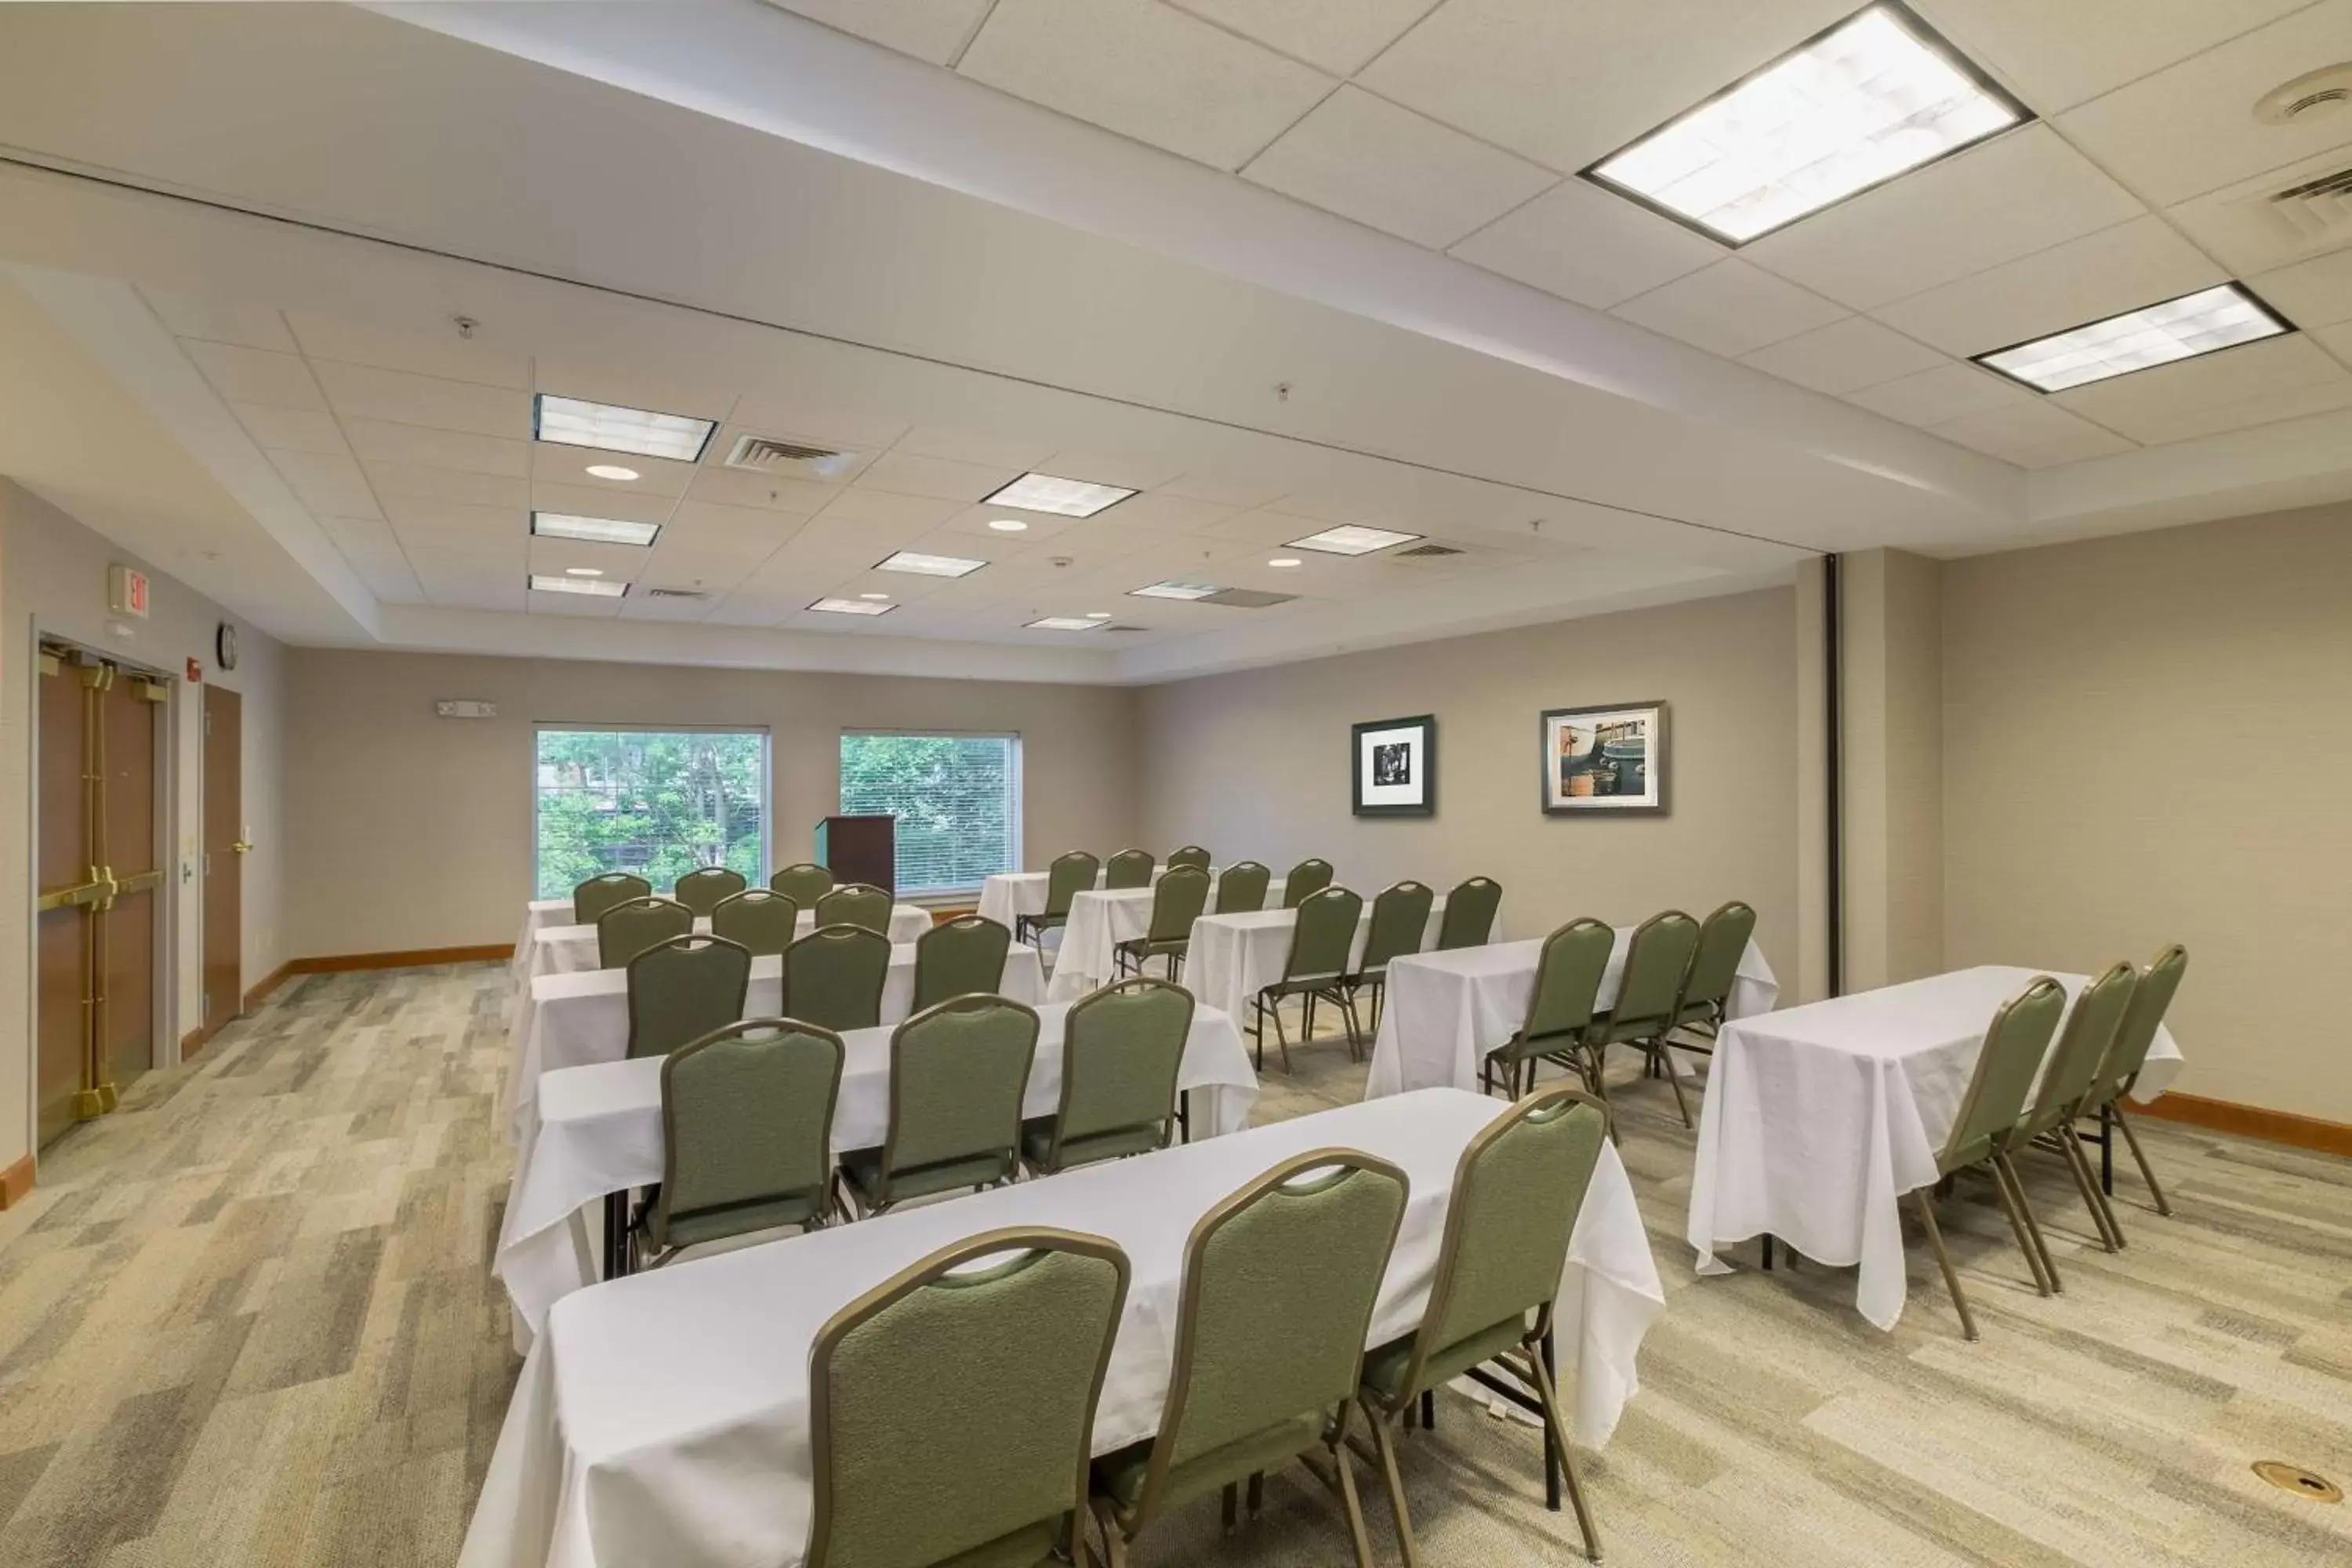 Meeting/conference room in Hampton Inn Waterville